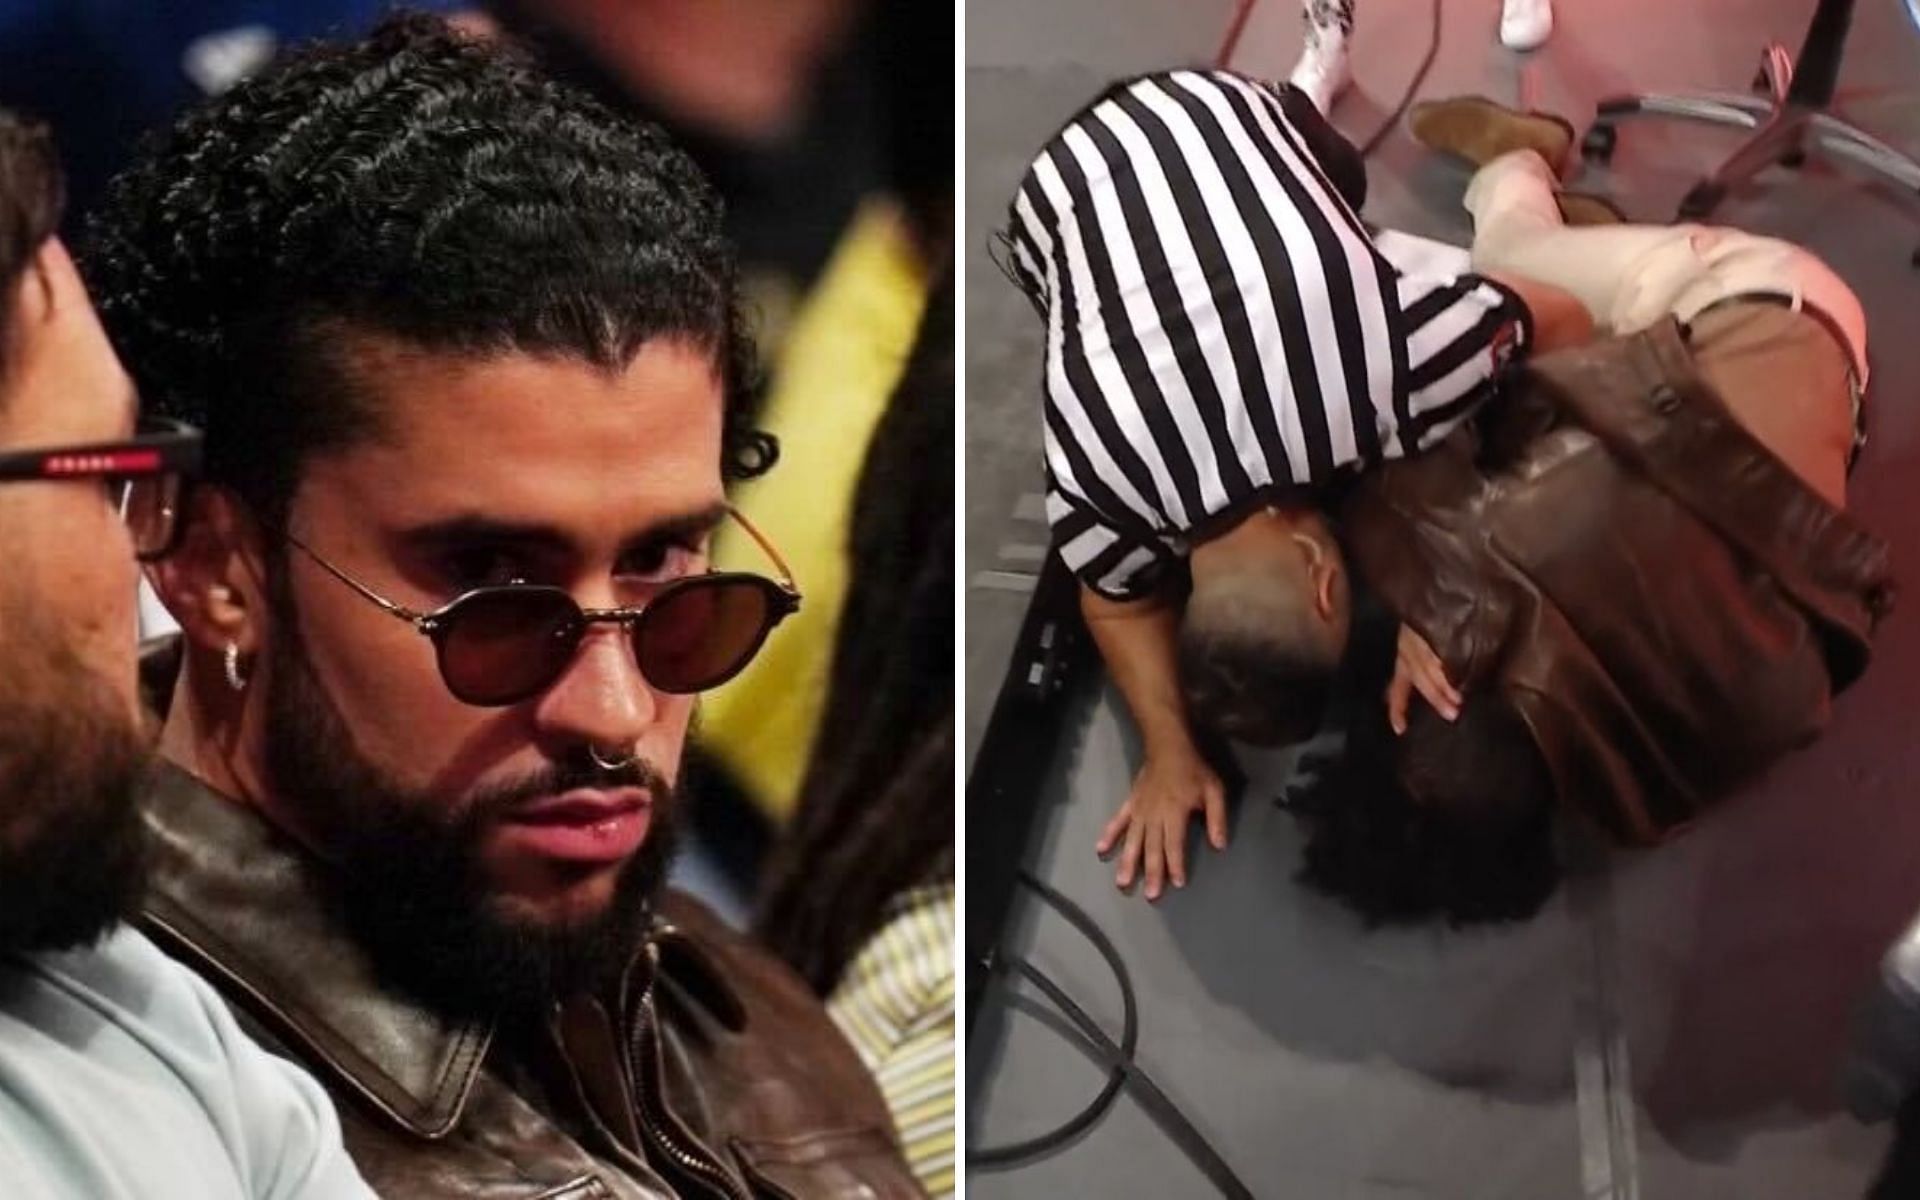 The Puerto Rican megastar was assaulted on RAW